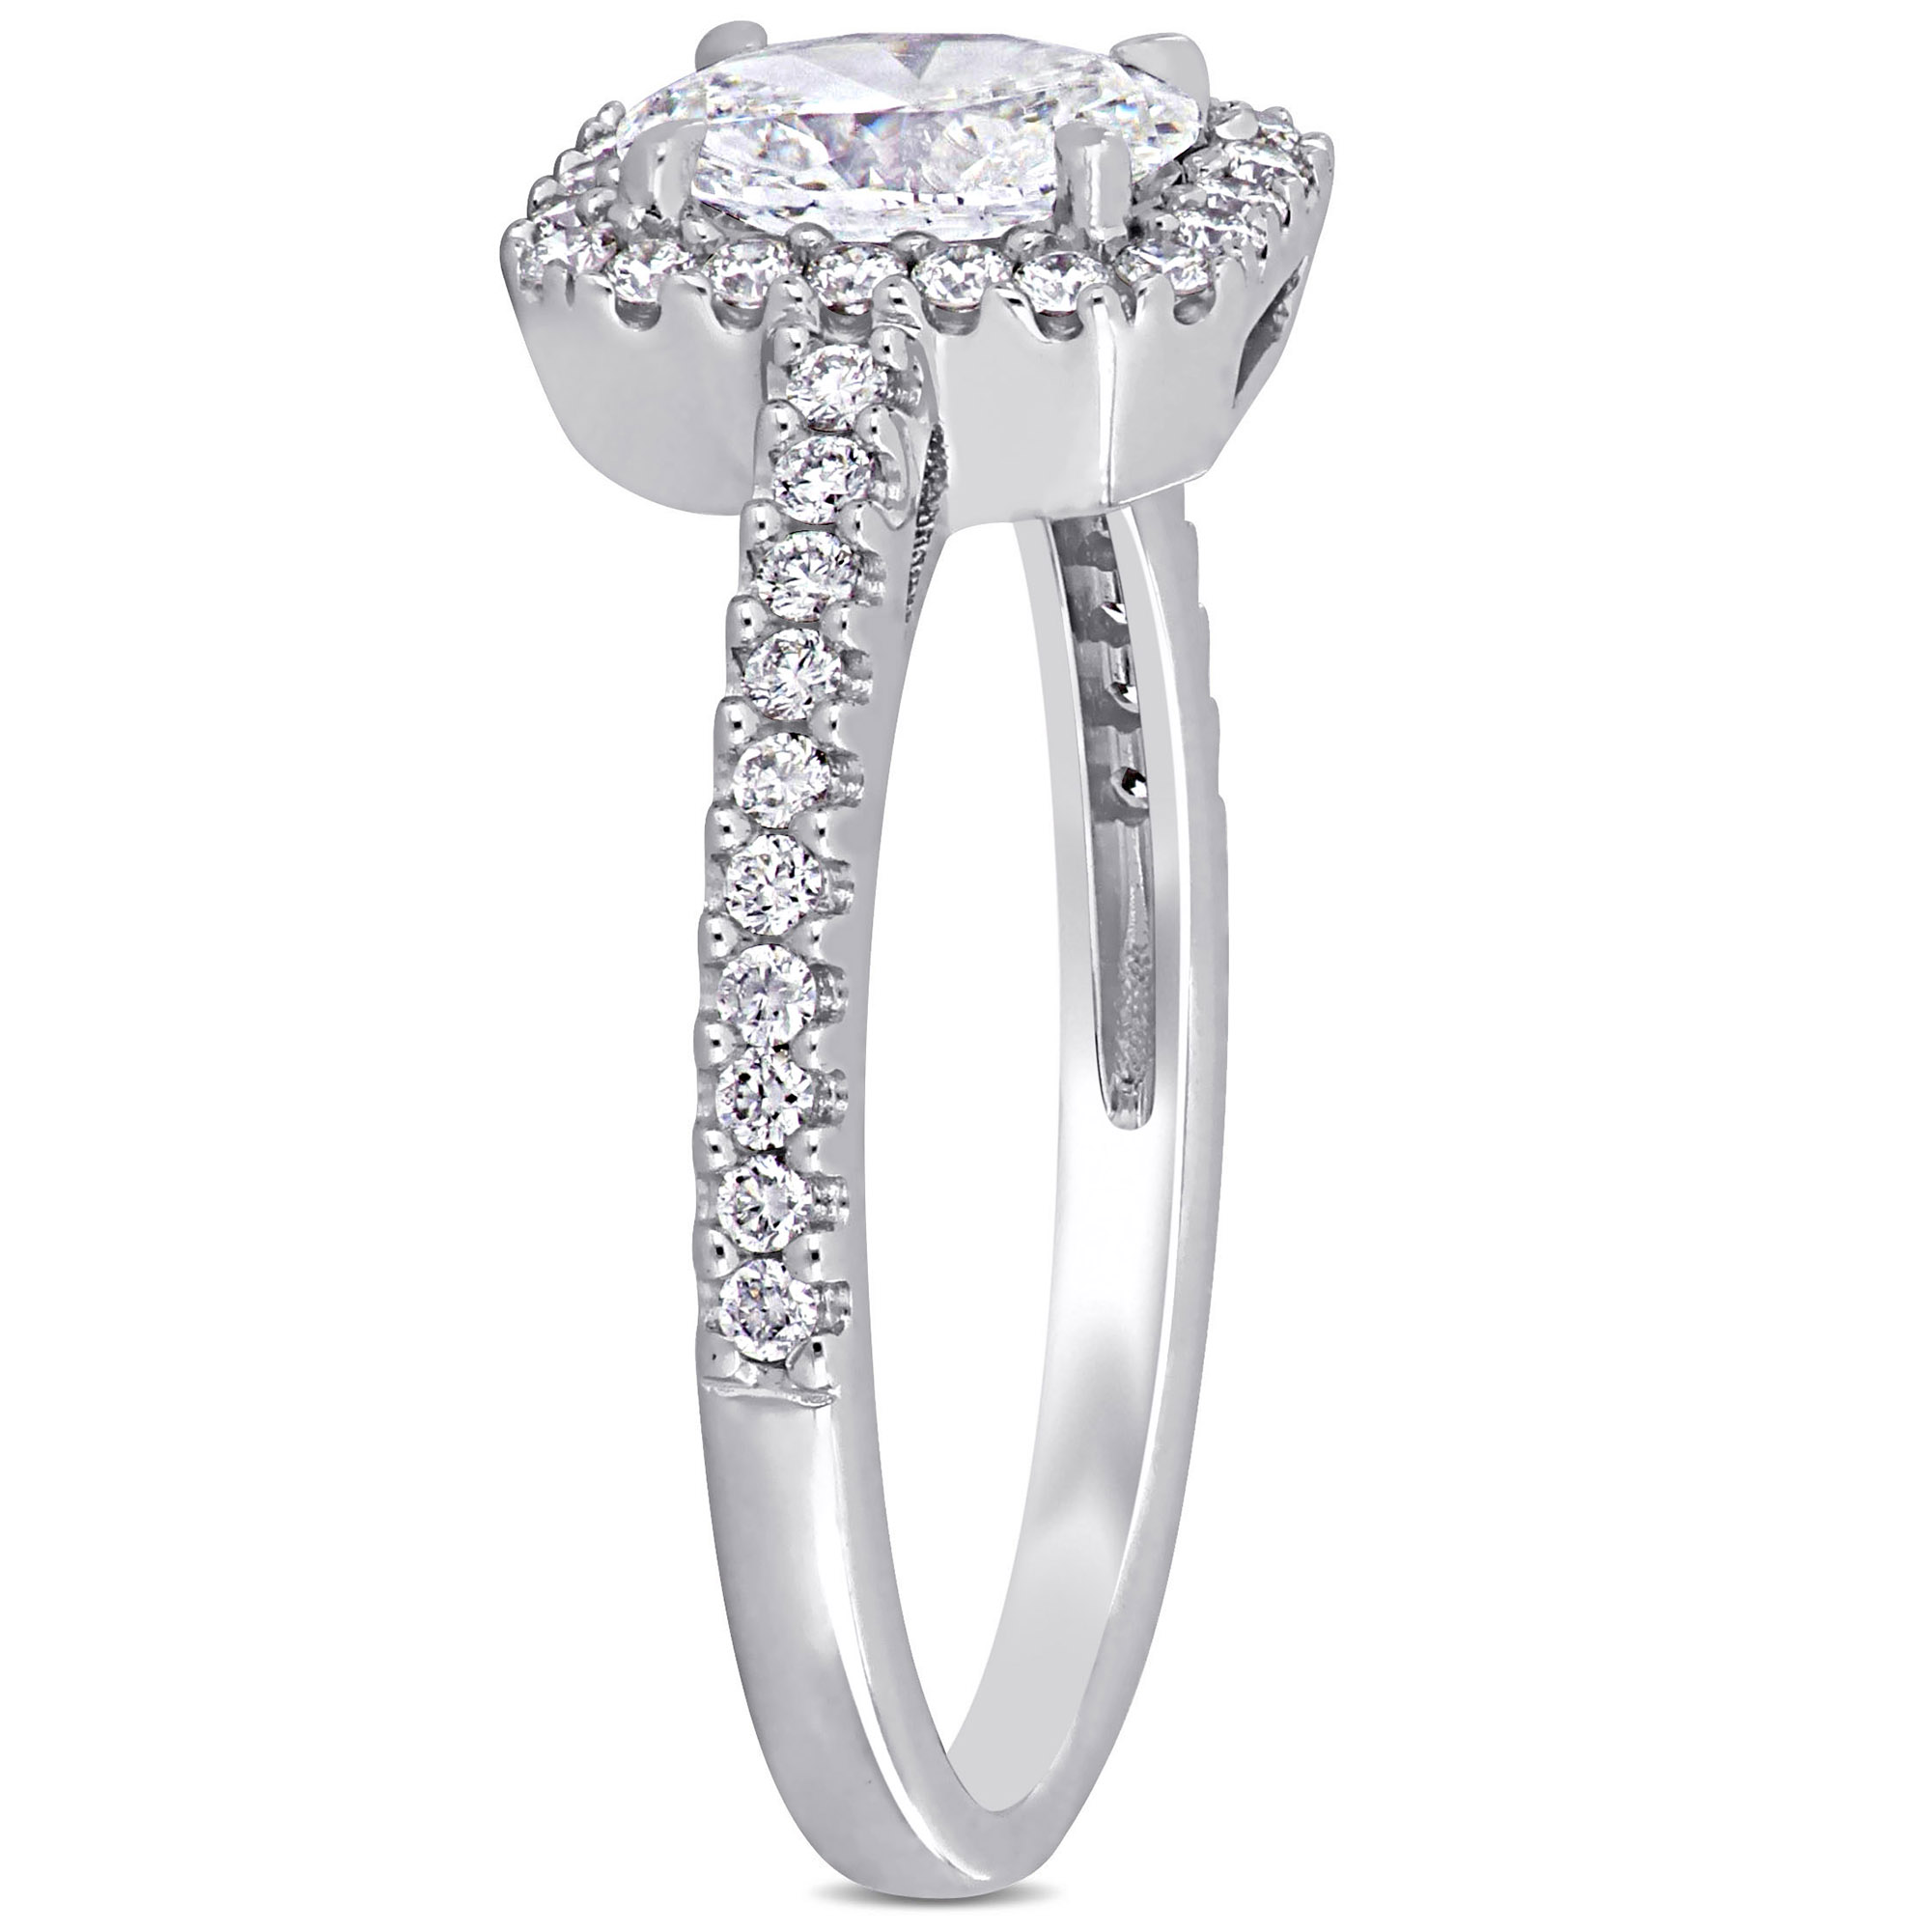 1 CT TW Diamond Halo Engagement Ring in 14k White Gold